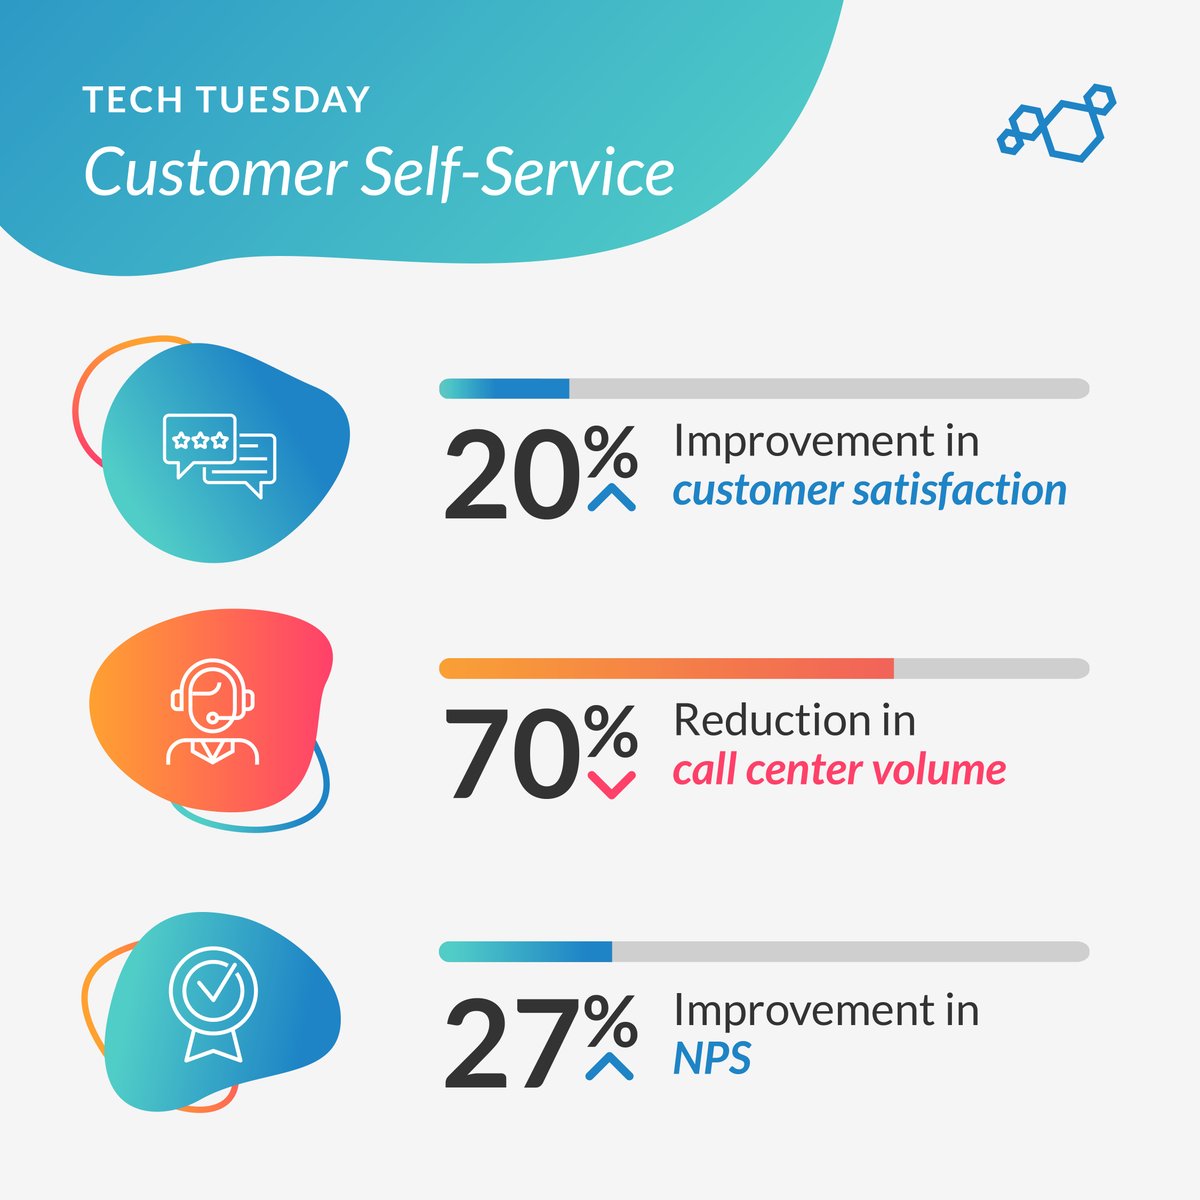 Eliminate the need to put your customers on hold. 📞 ✋ 

Investing in a customer self-service portal elevates the customer experience — learn more about how ServicePower can create a fully branded portal for your #fieldservice needs at servicepower.com.

 #TechTuesday